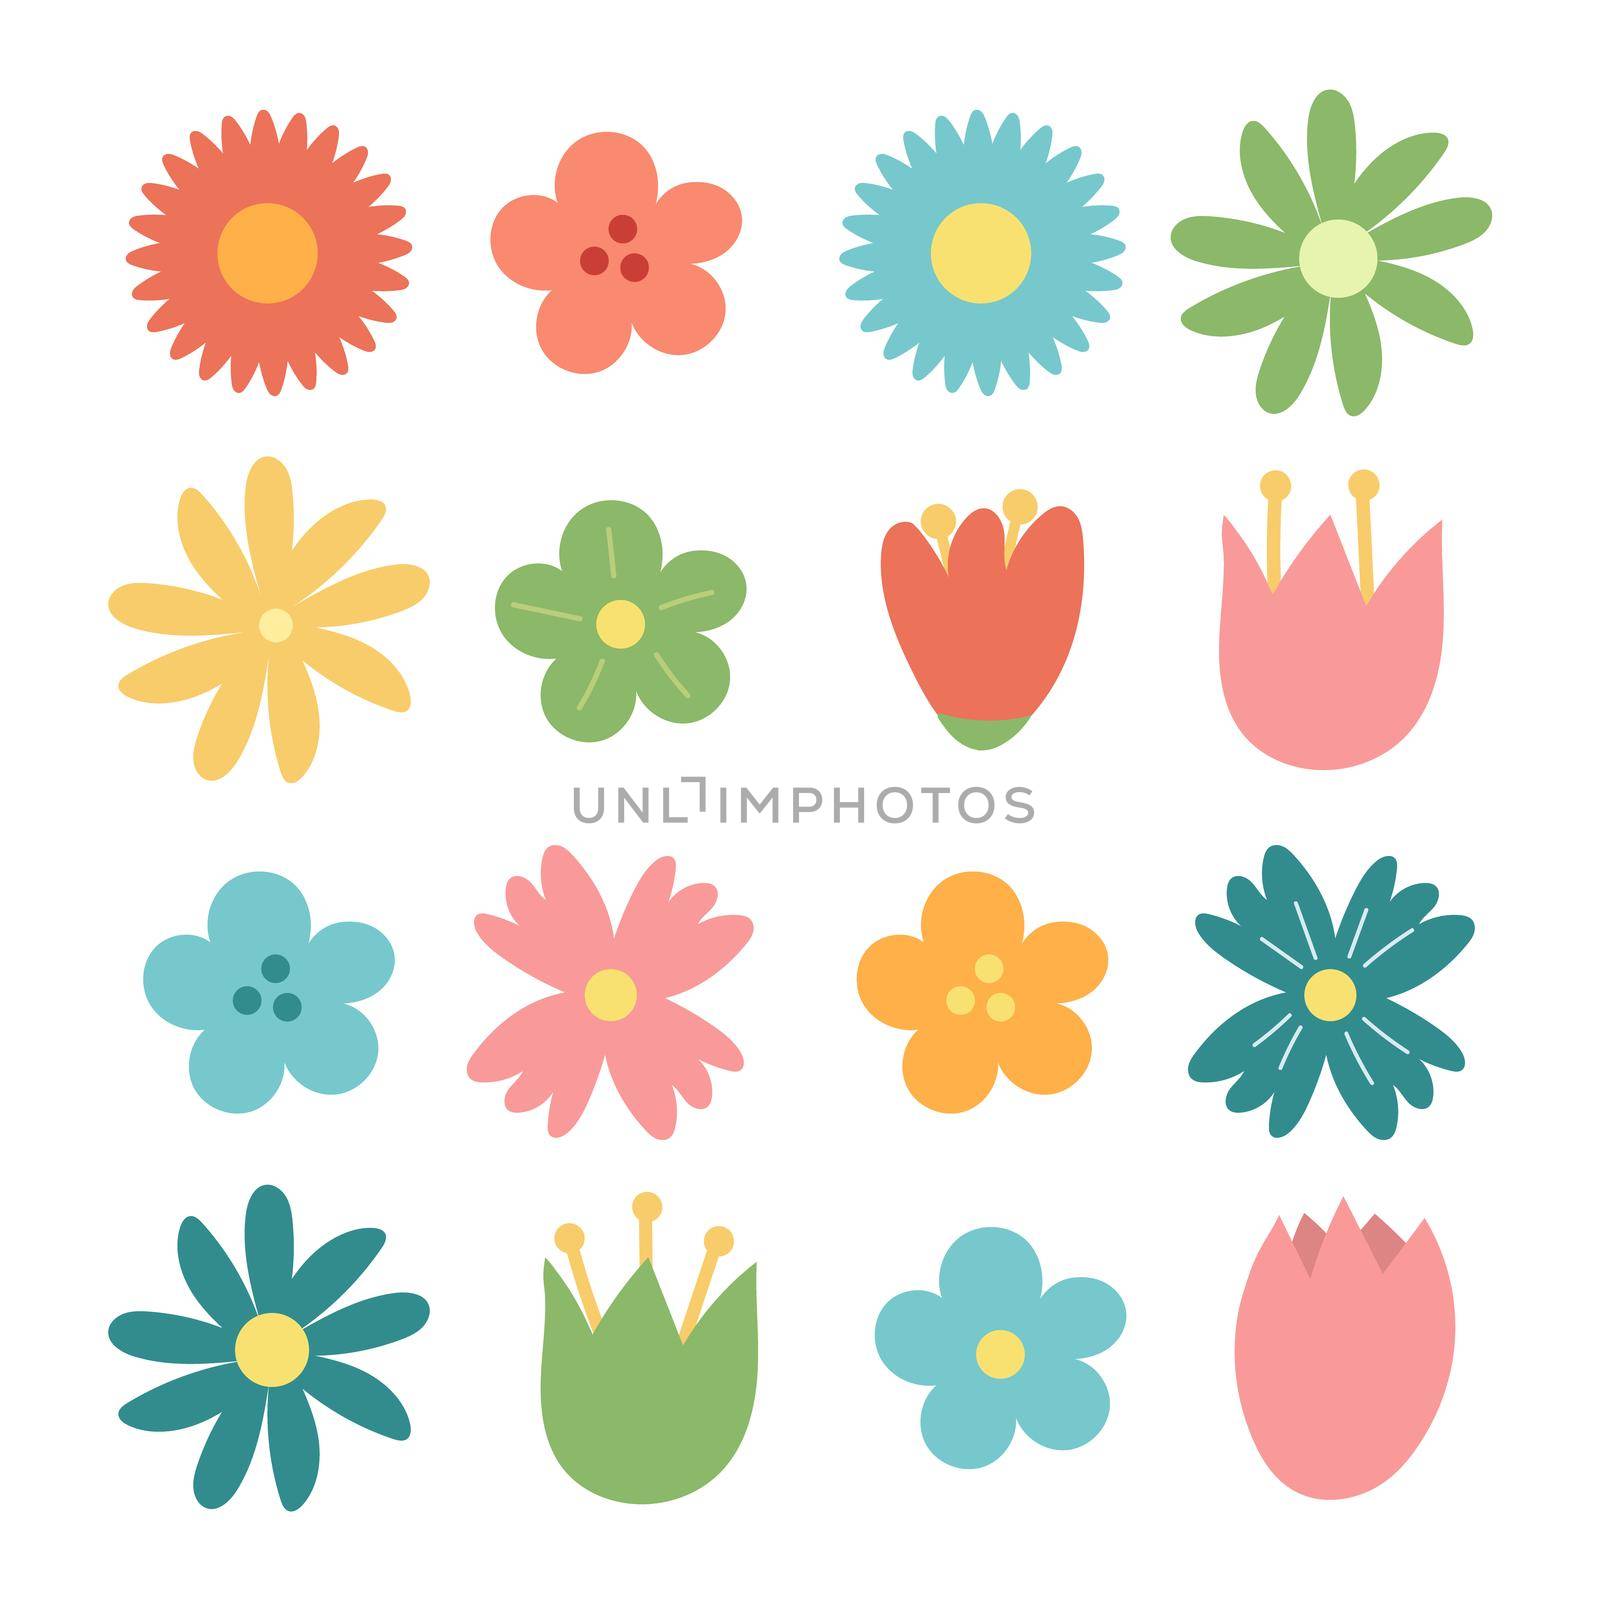 Set of hand drawn flower icons isolated on white. Cute cartoon design in bright colors for stickers, labels, tags, gift wrapping paper